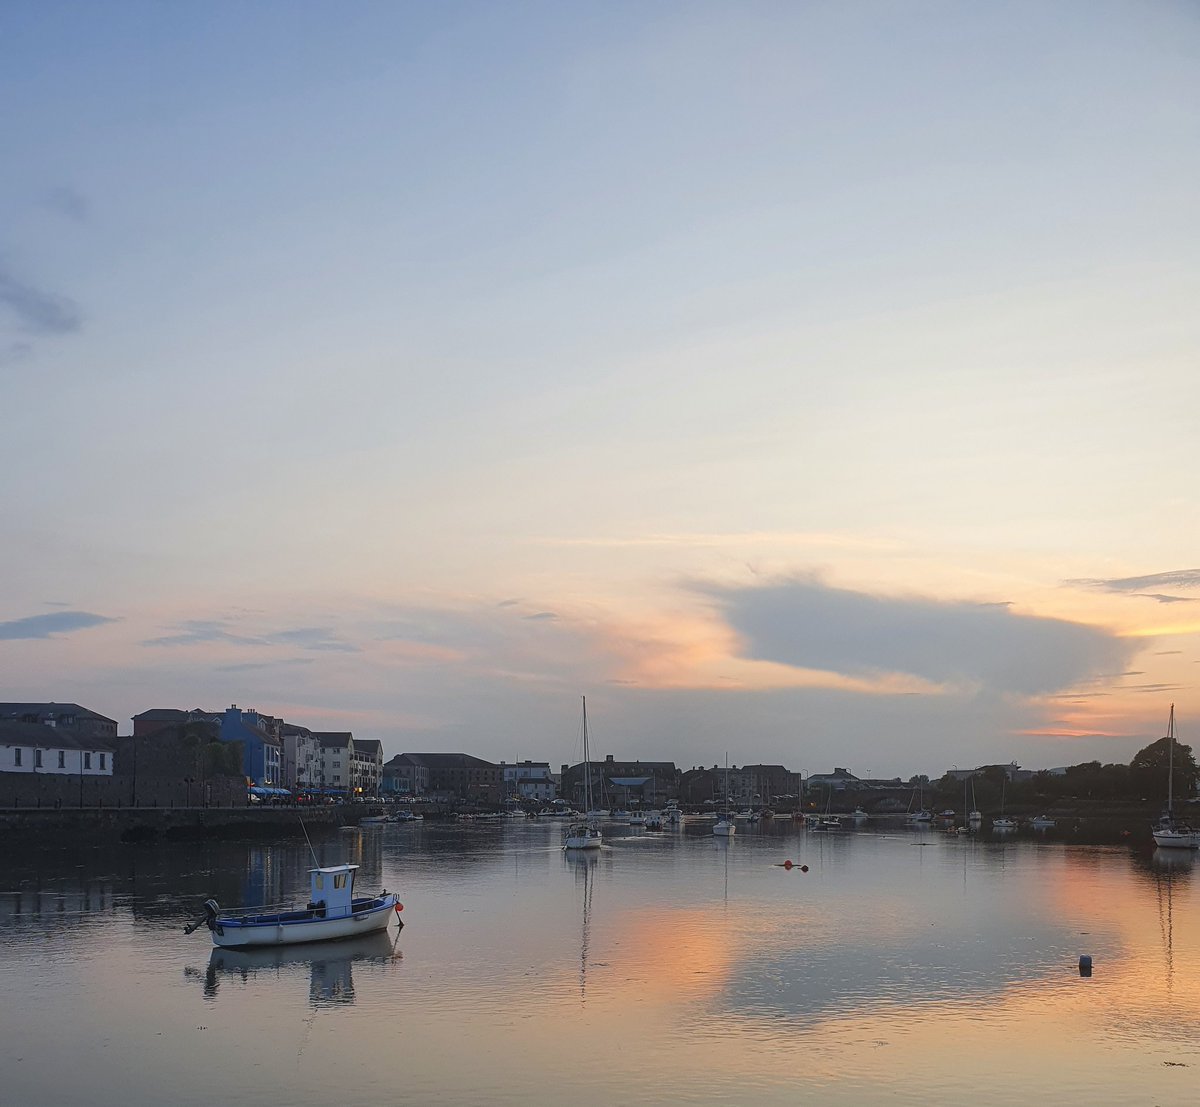 So peaceful and 'tranquil '
Dungarvan Harbour 
#DailyPictureTheme 
@DailyPicTheme2